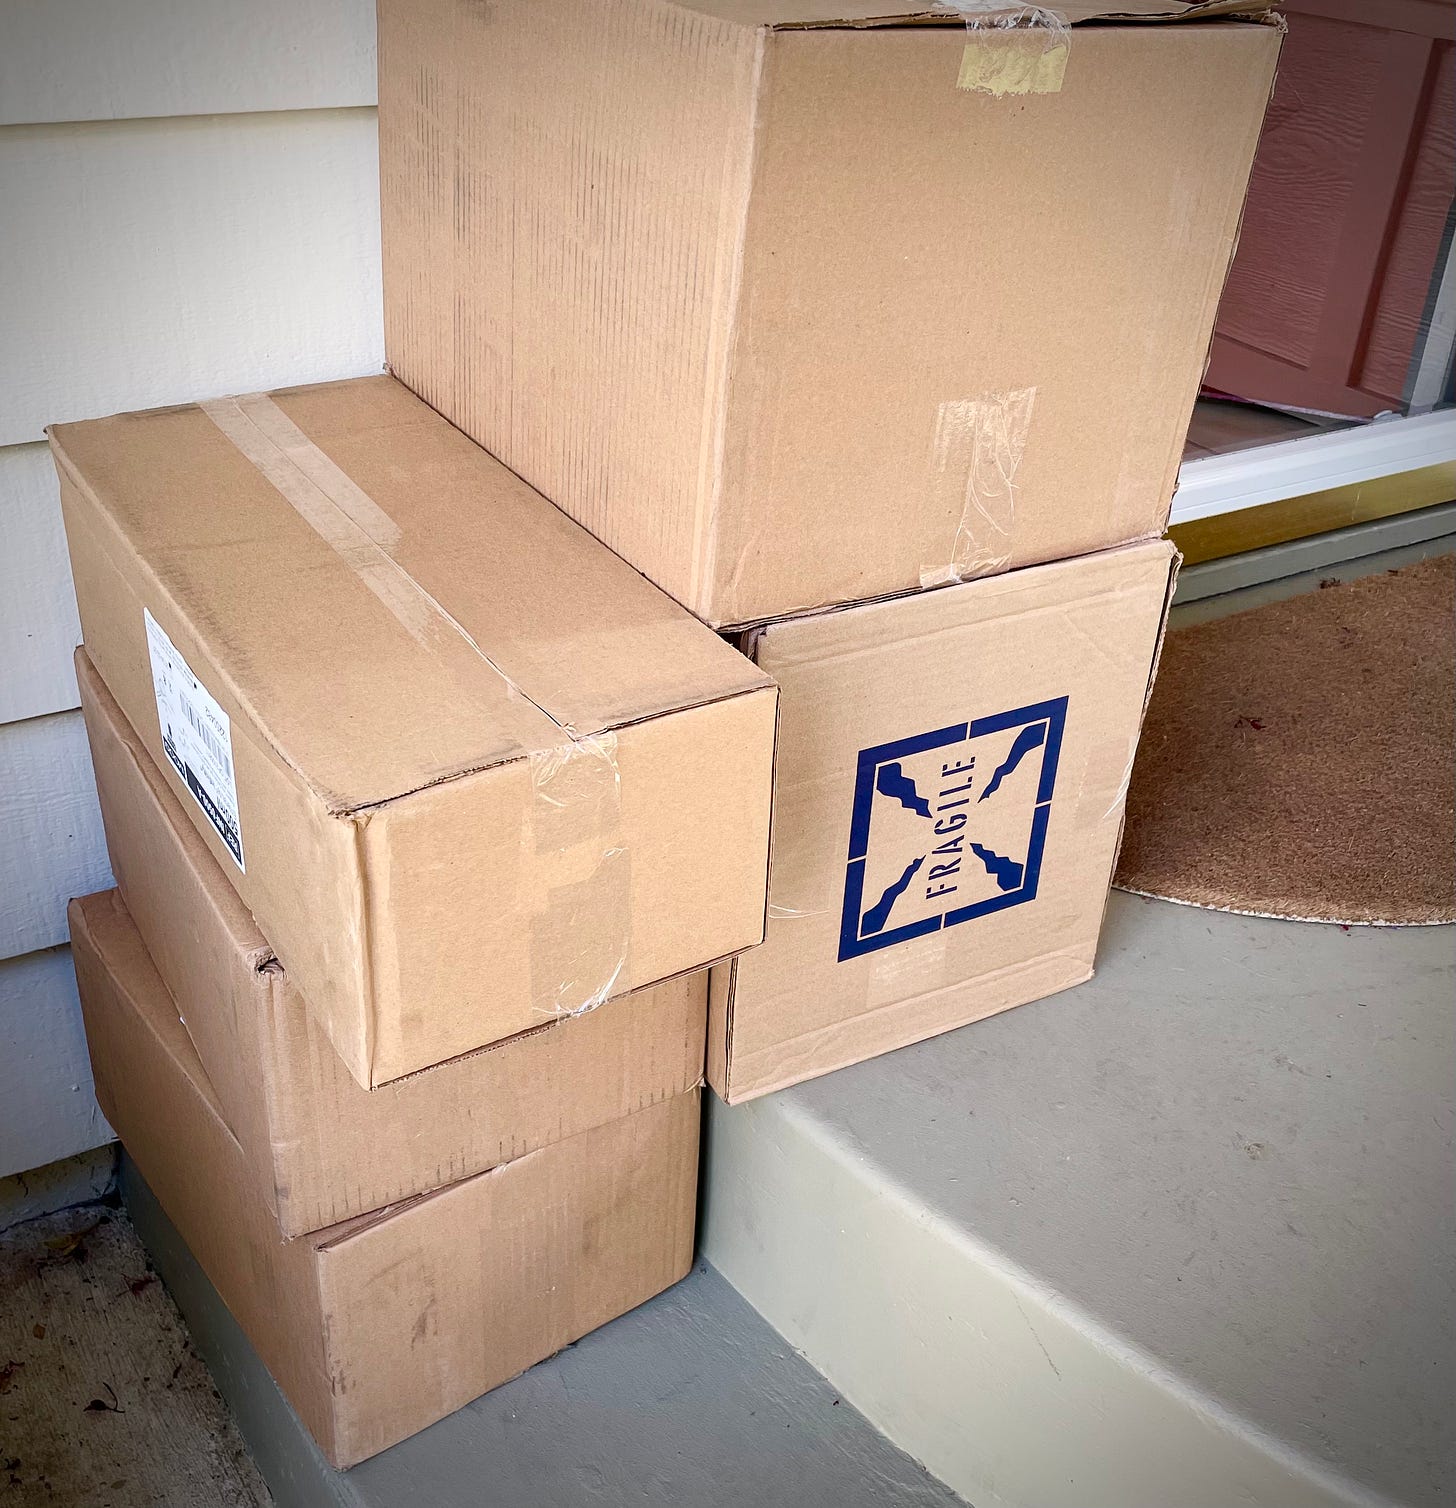 A package marked "fragile" rests crooked under other packages on stairs in front of a door. 